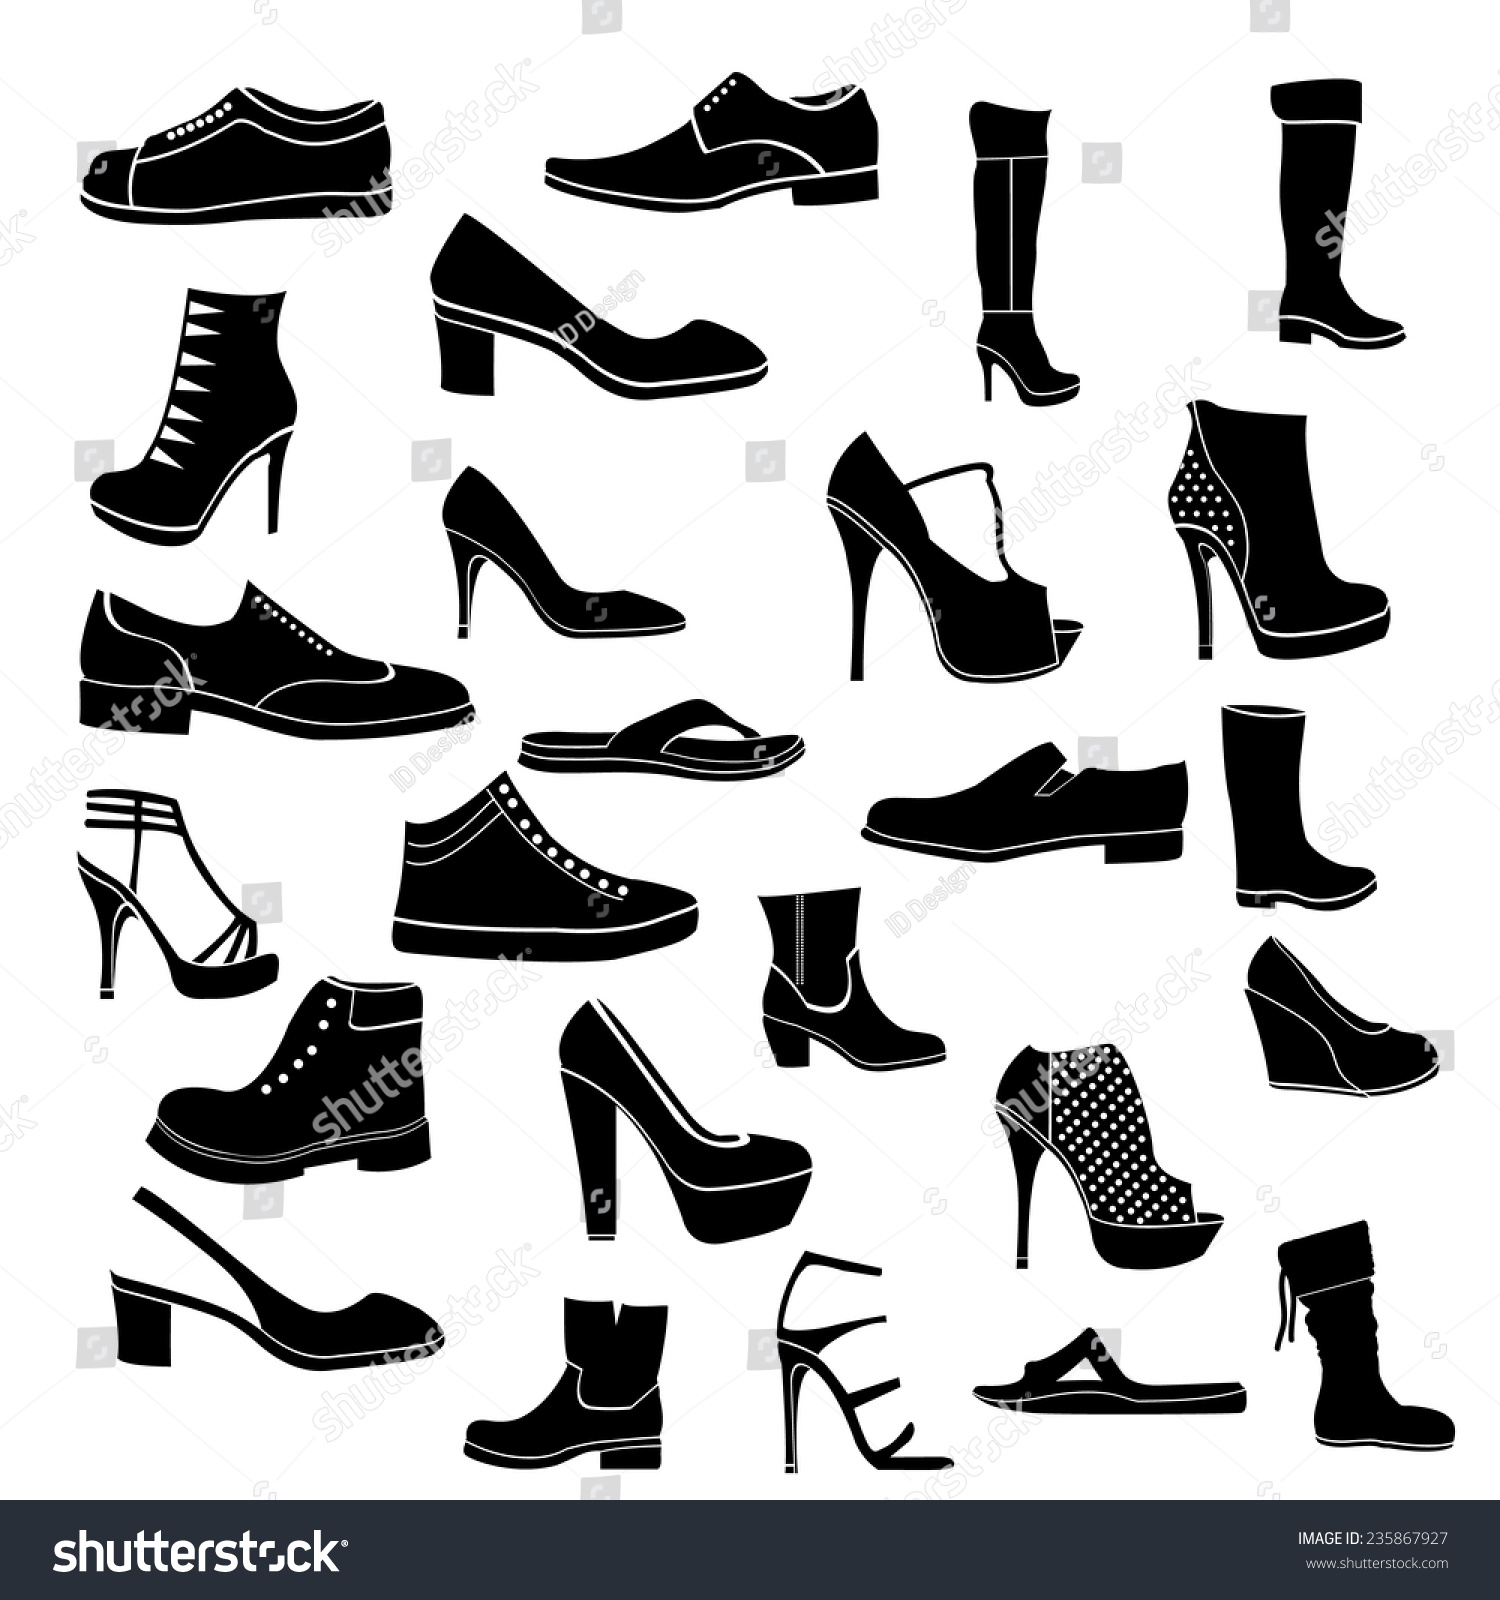 Shoes Icon Black White Stock Vector 235867927 - Shutterstock